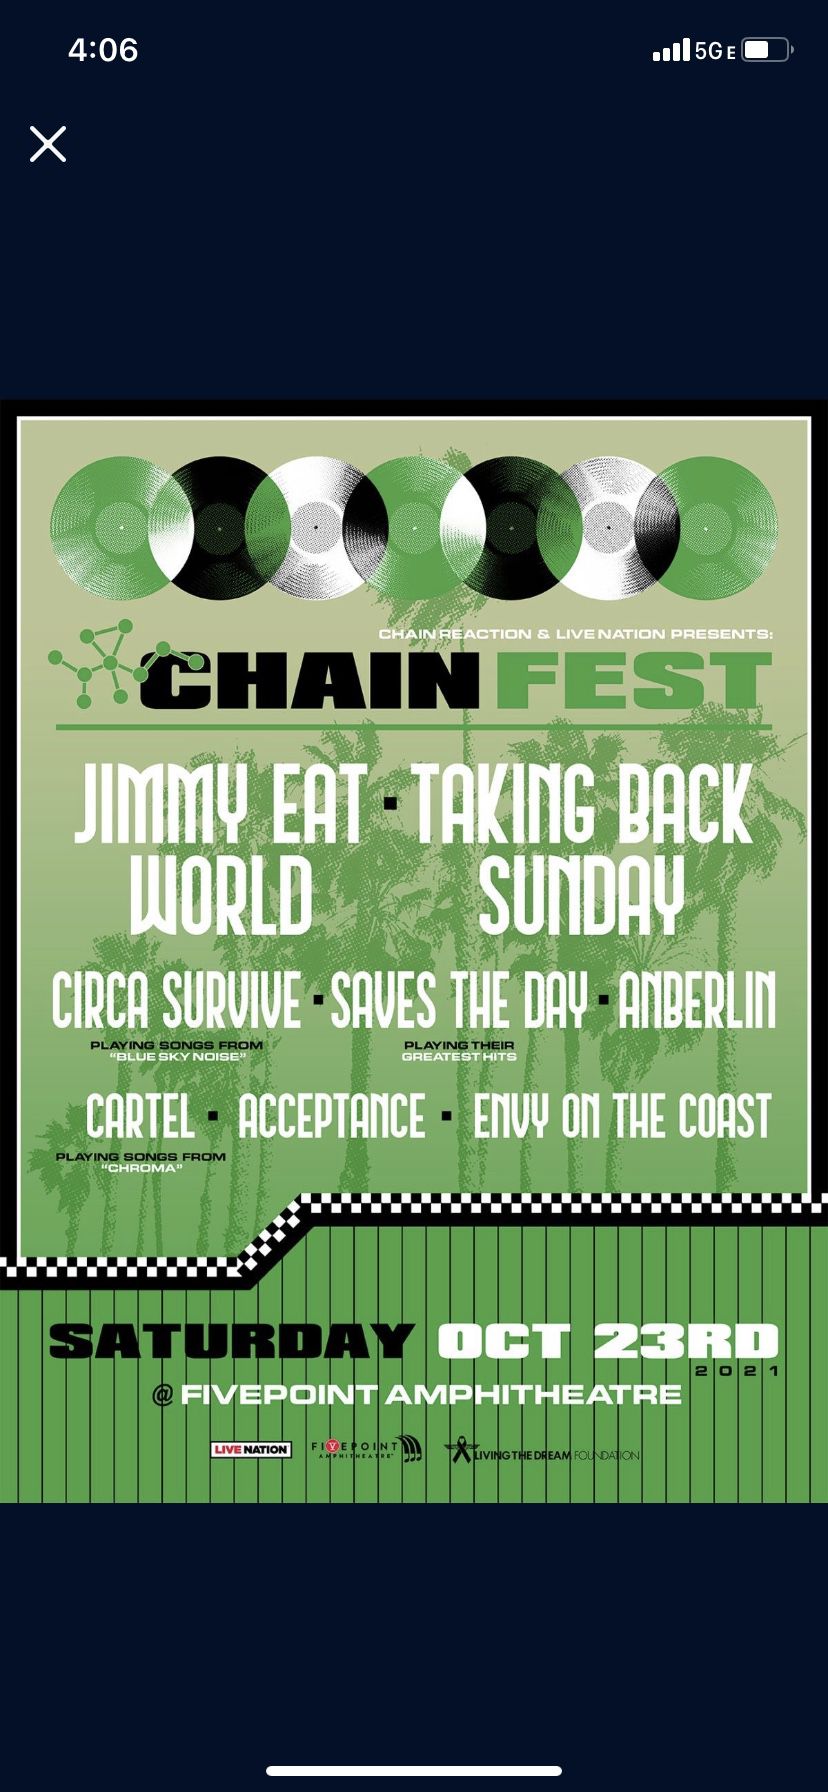 Free Ticket To Chain Fest Taking Back Sunday Jimmy Eat World